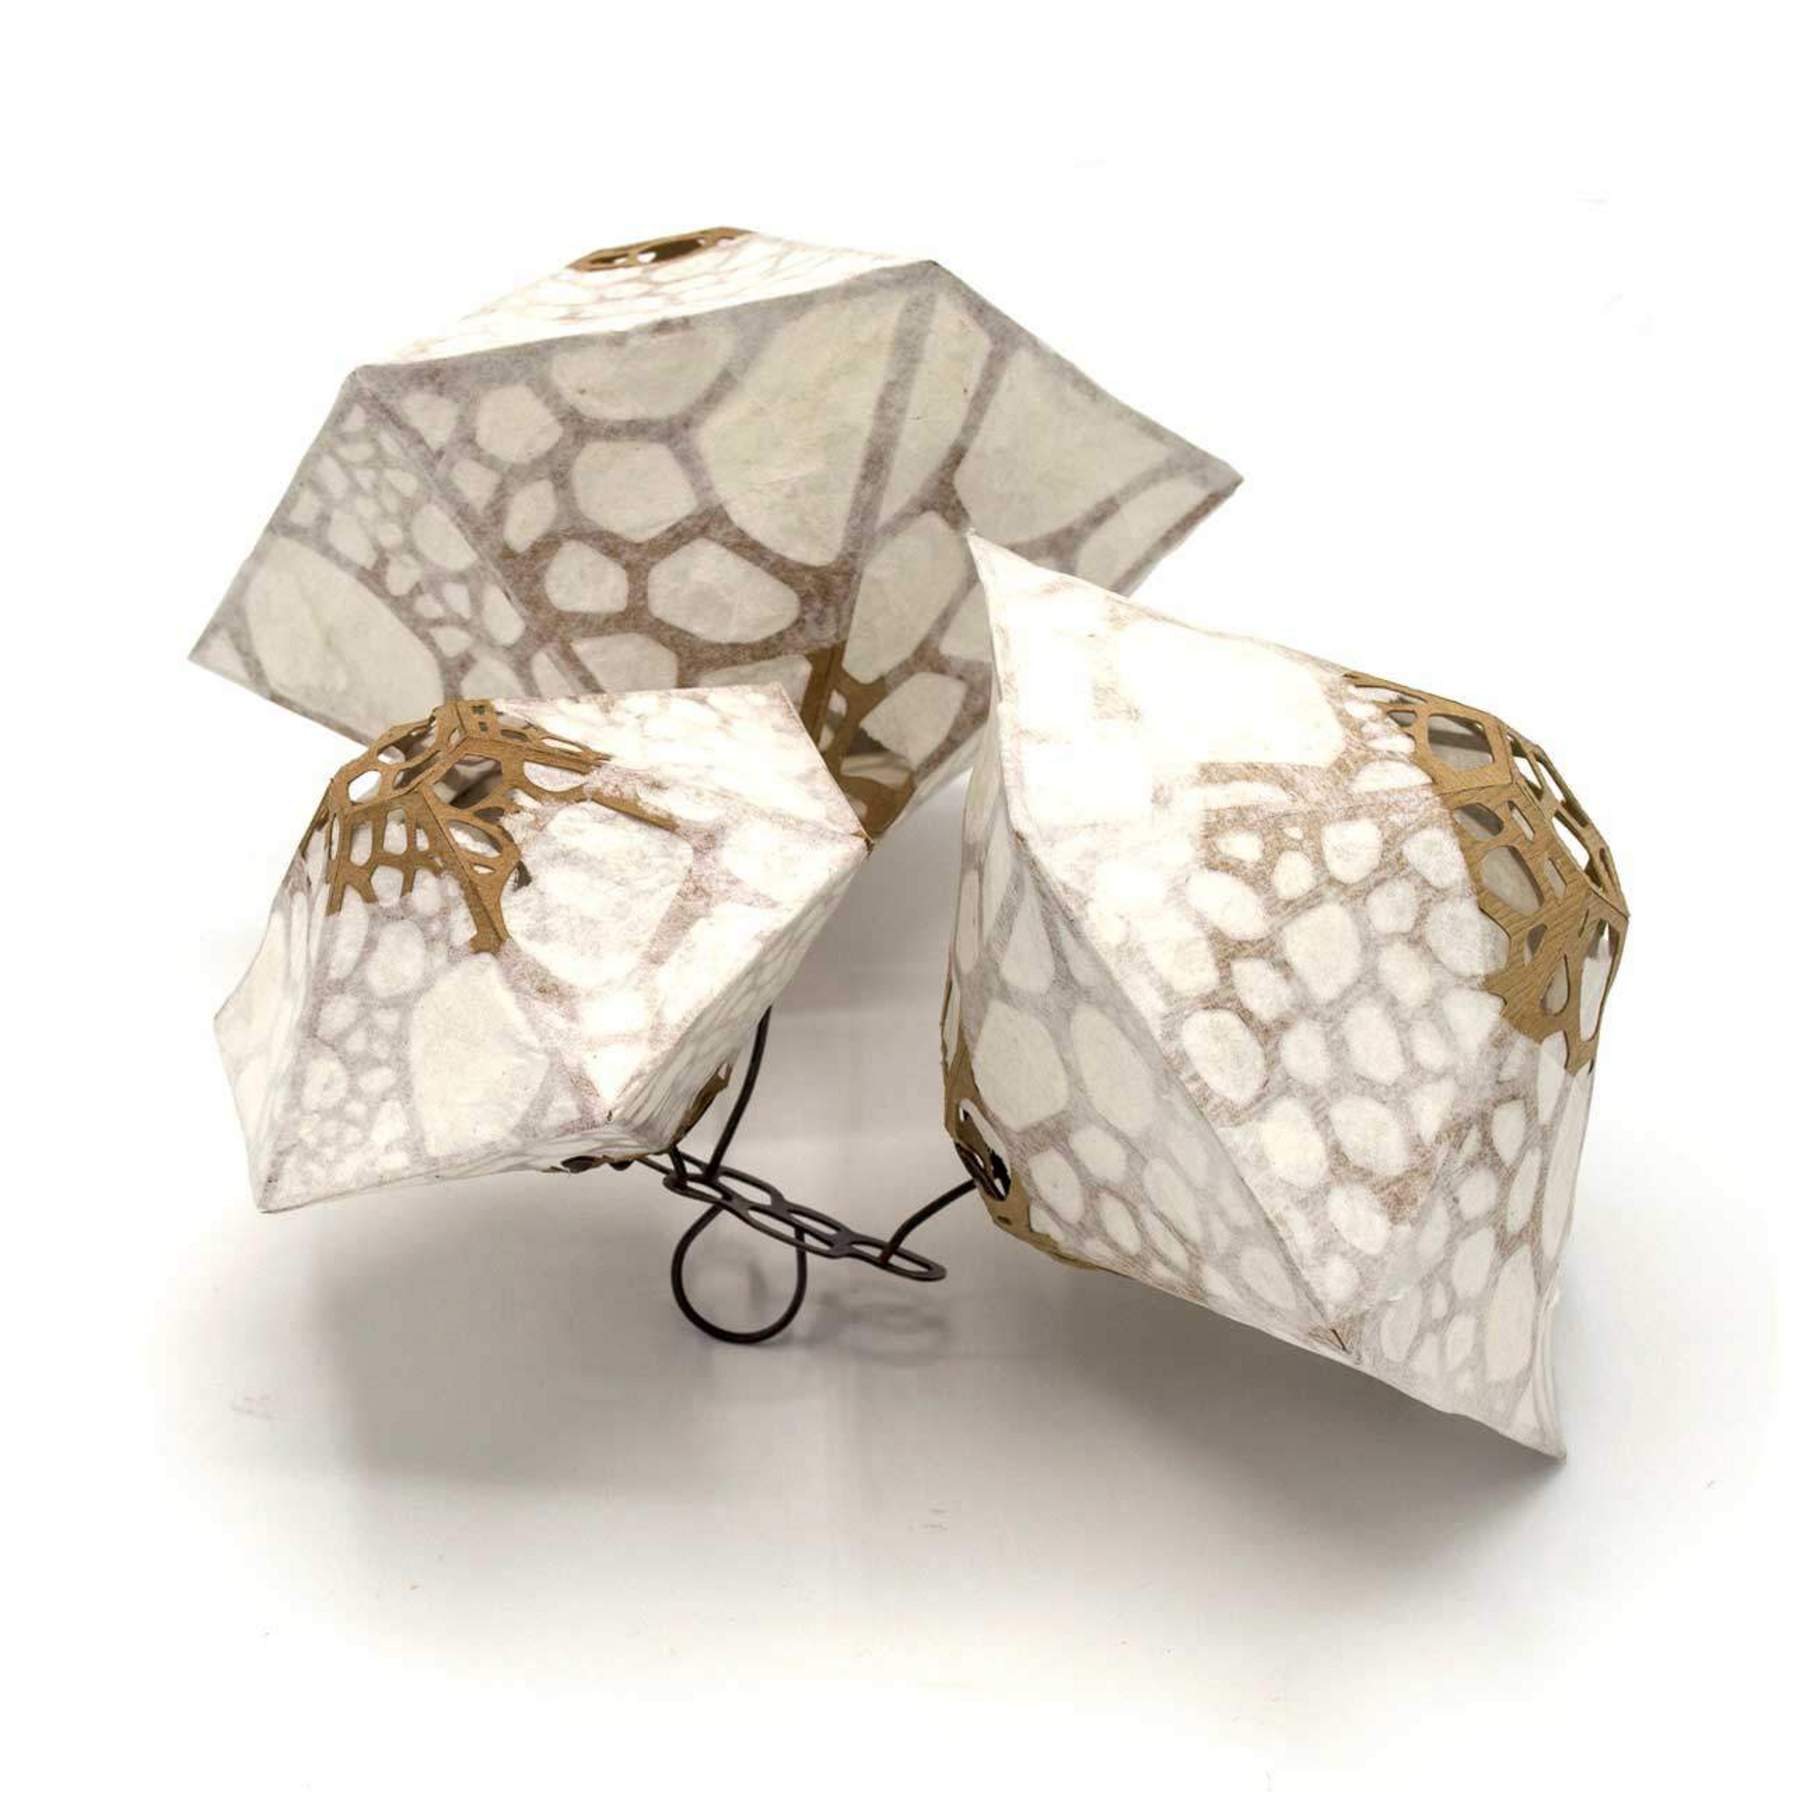 Student work: faceted geometric forms in transluscent paper with brown web-like pattern underneath